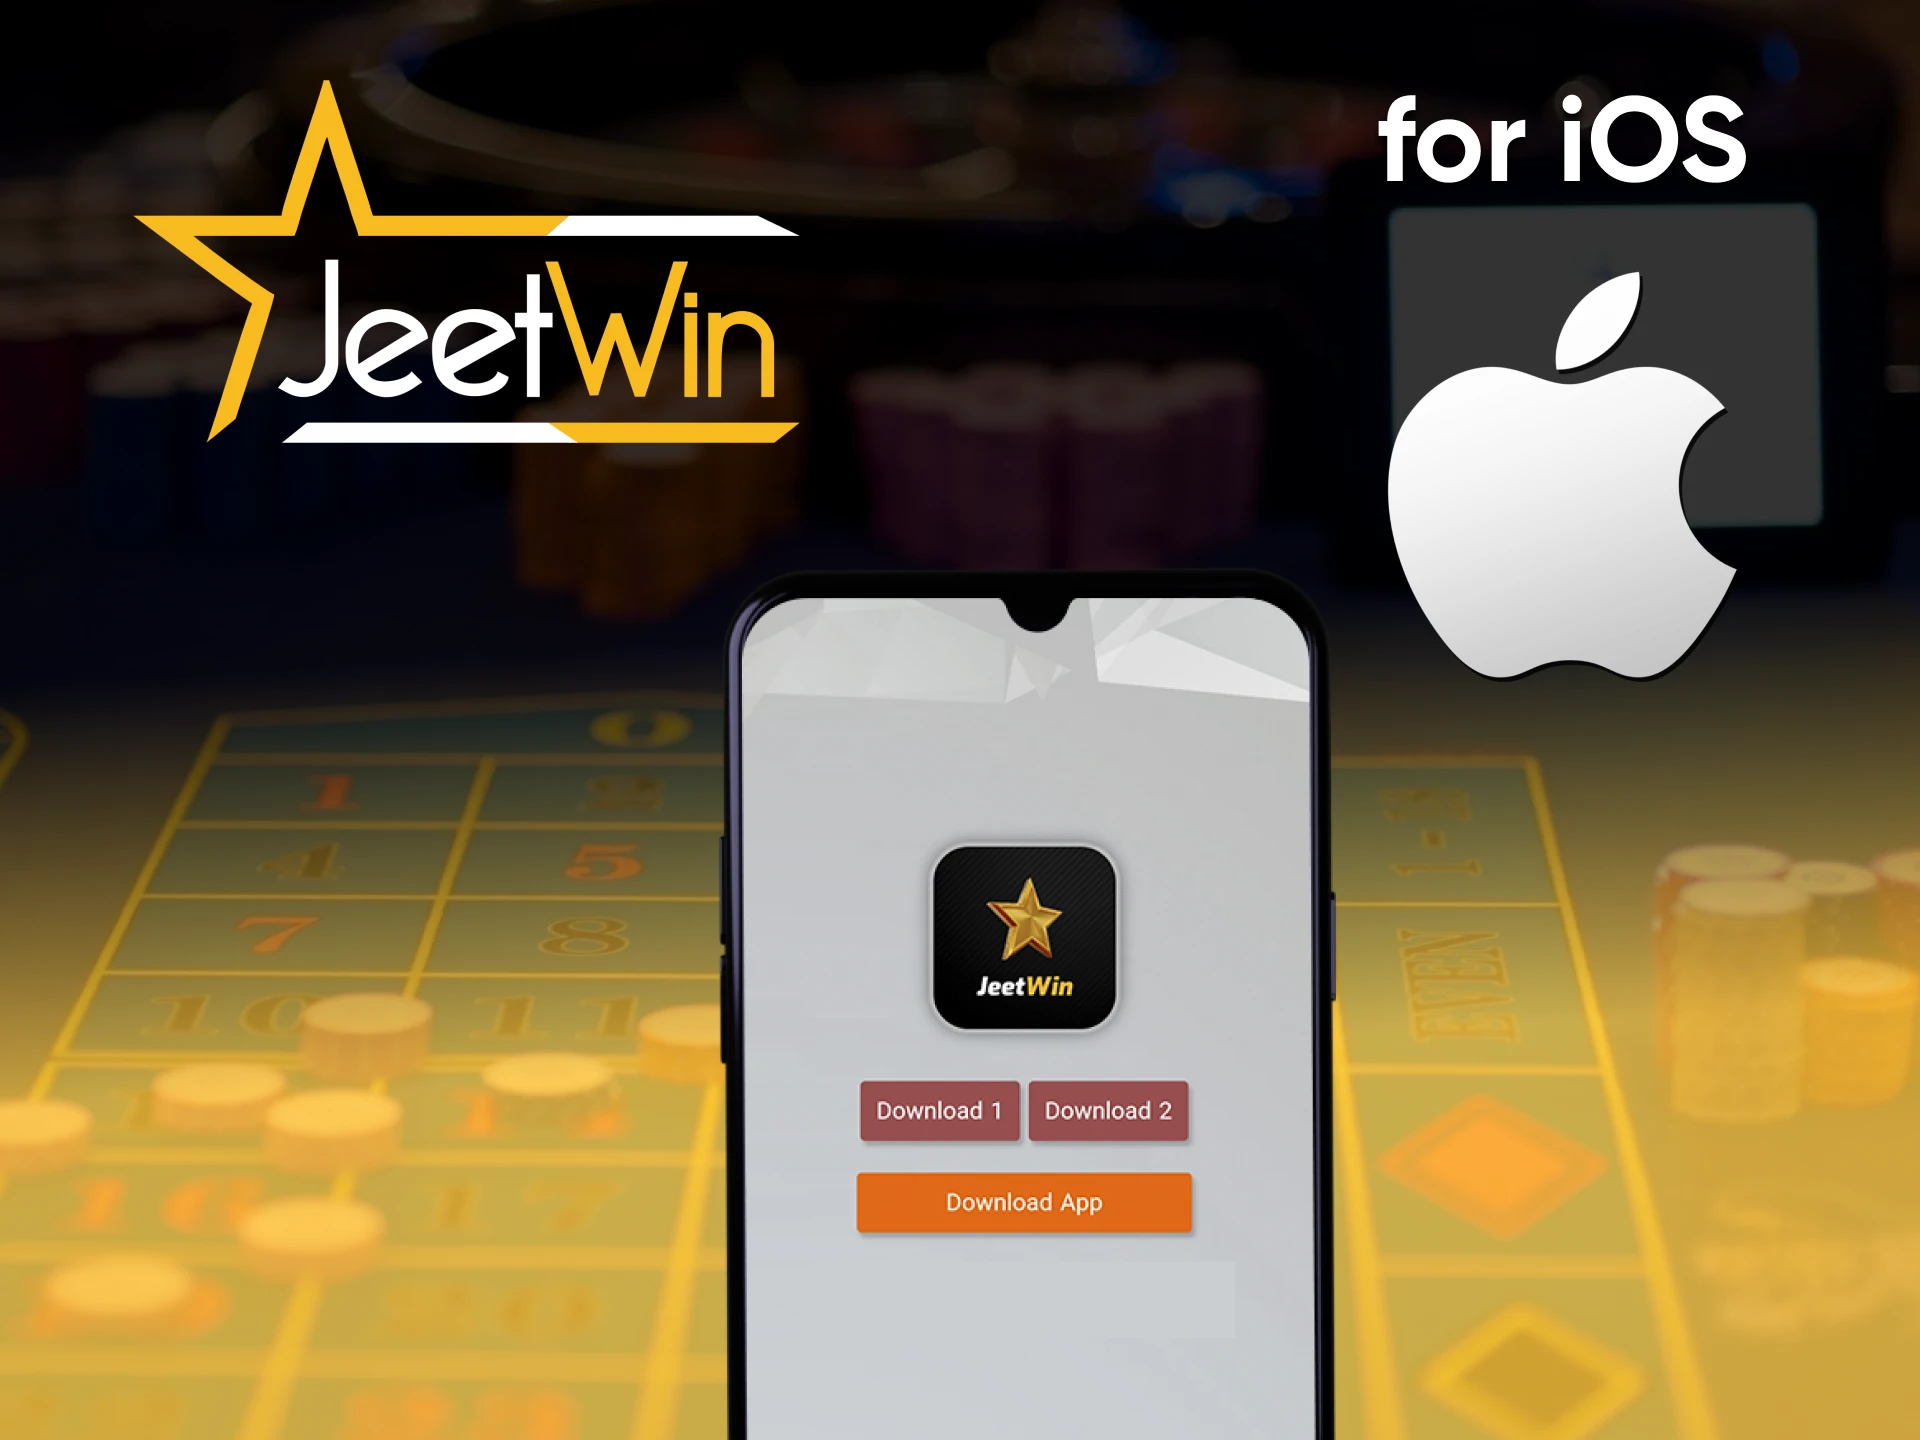 Download the Jeetwin app for iOS platform.